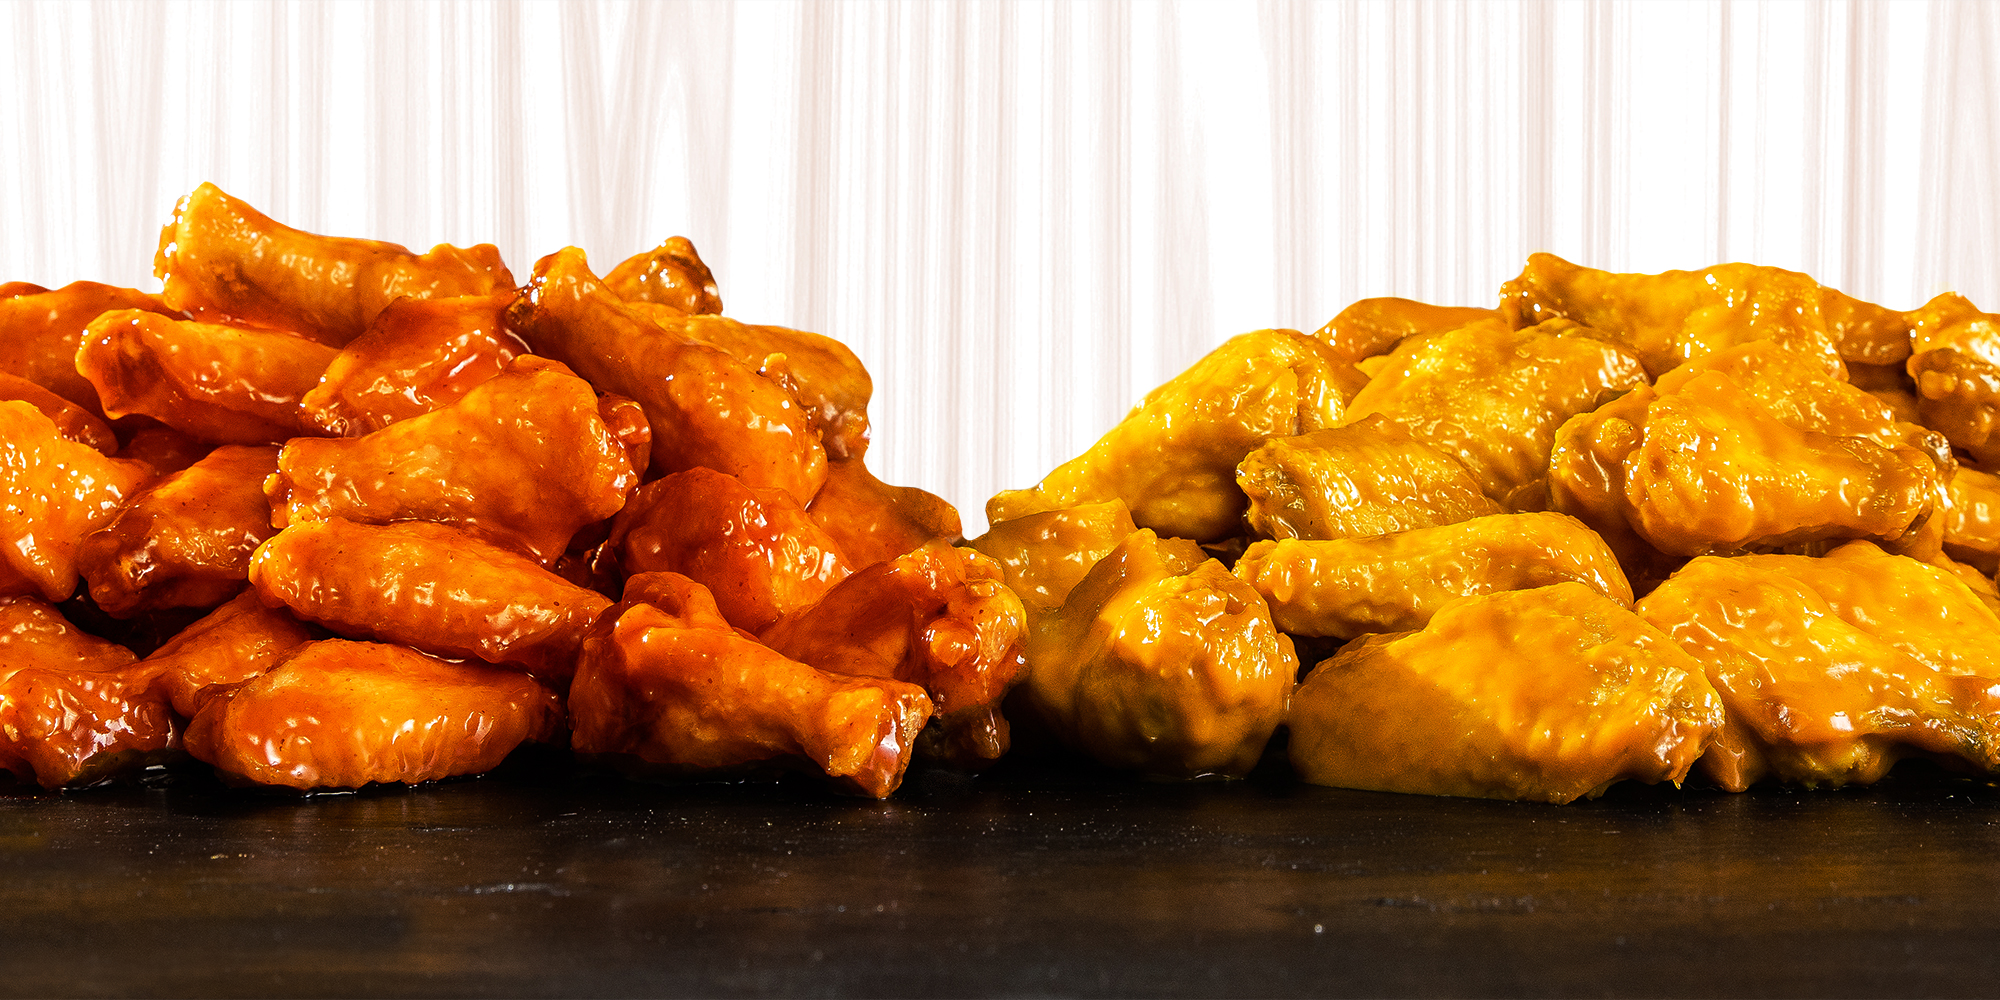 Slimsanity: Featuring Two New Wing Flavors